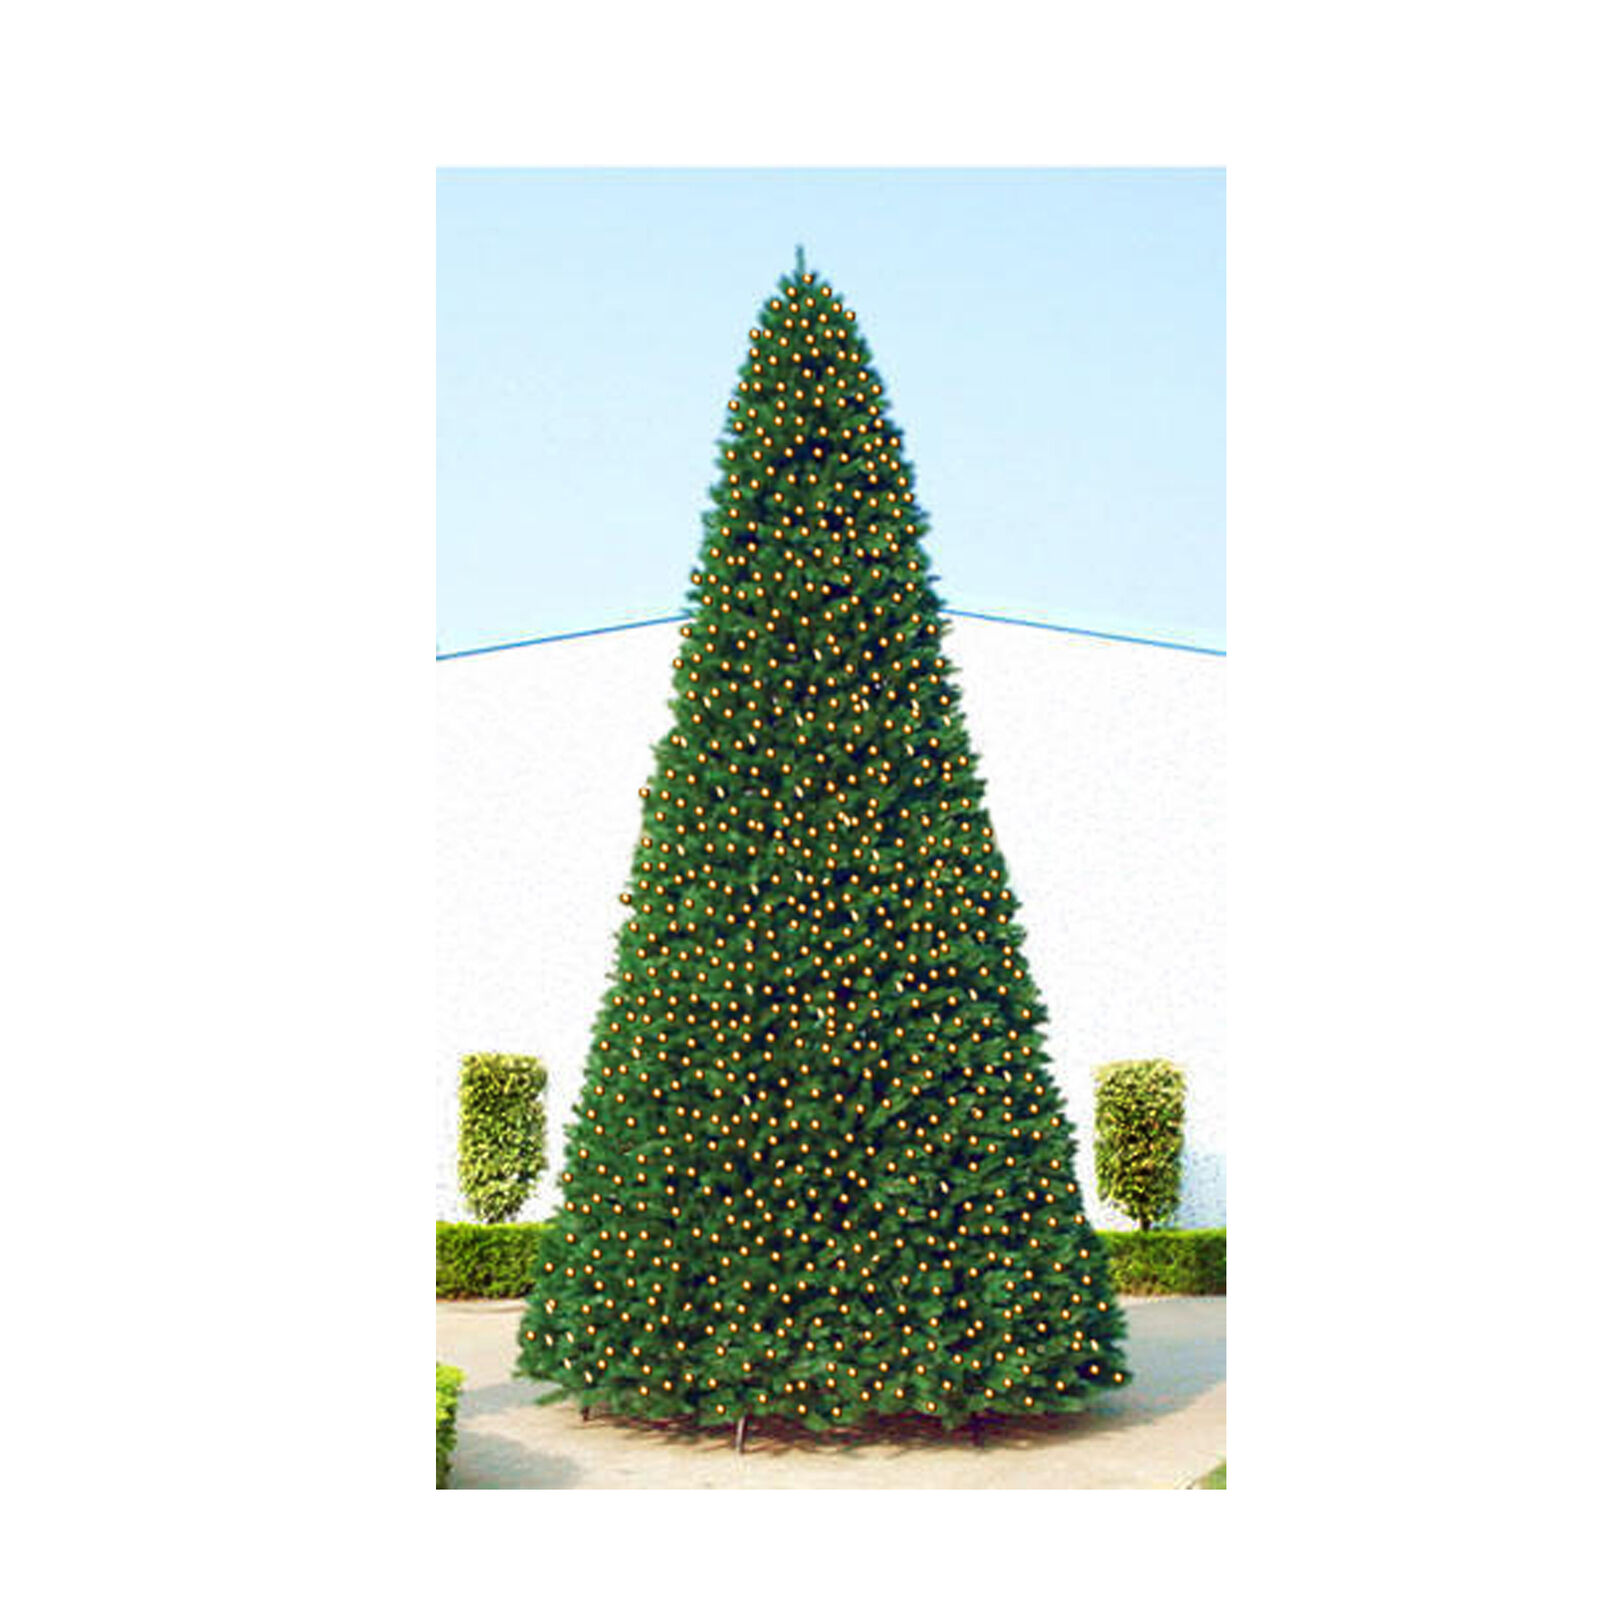 26.5' Pre-Lit Everest Fir Giant Commercial Tower Christmas Tree - Warm White C7